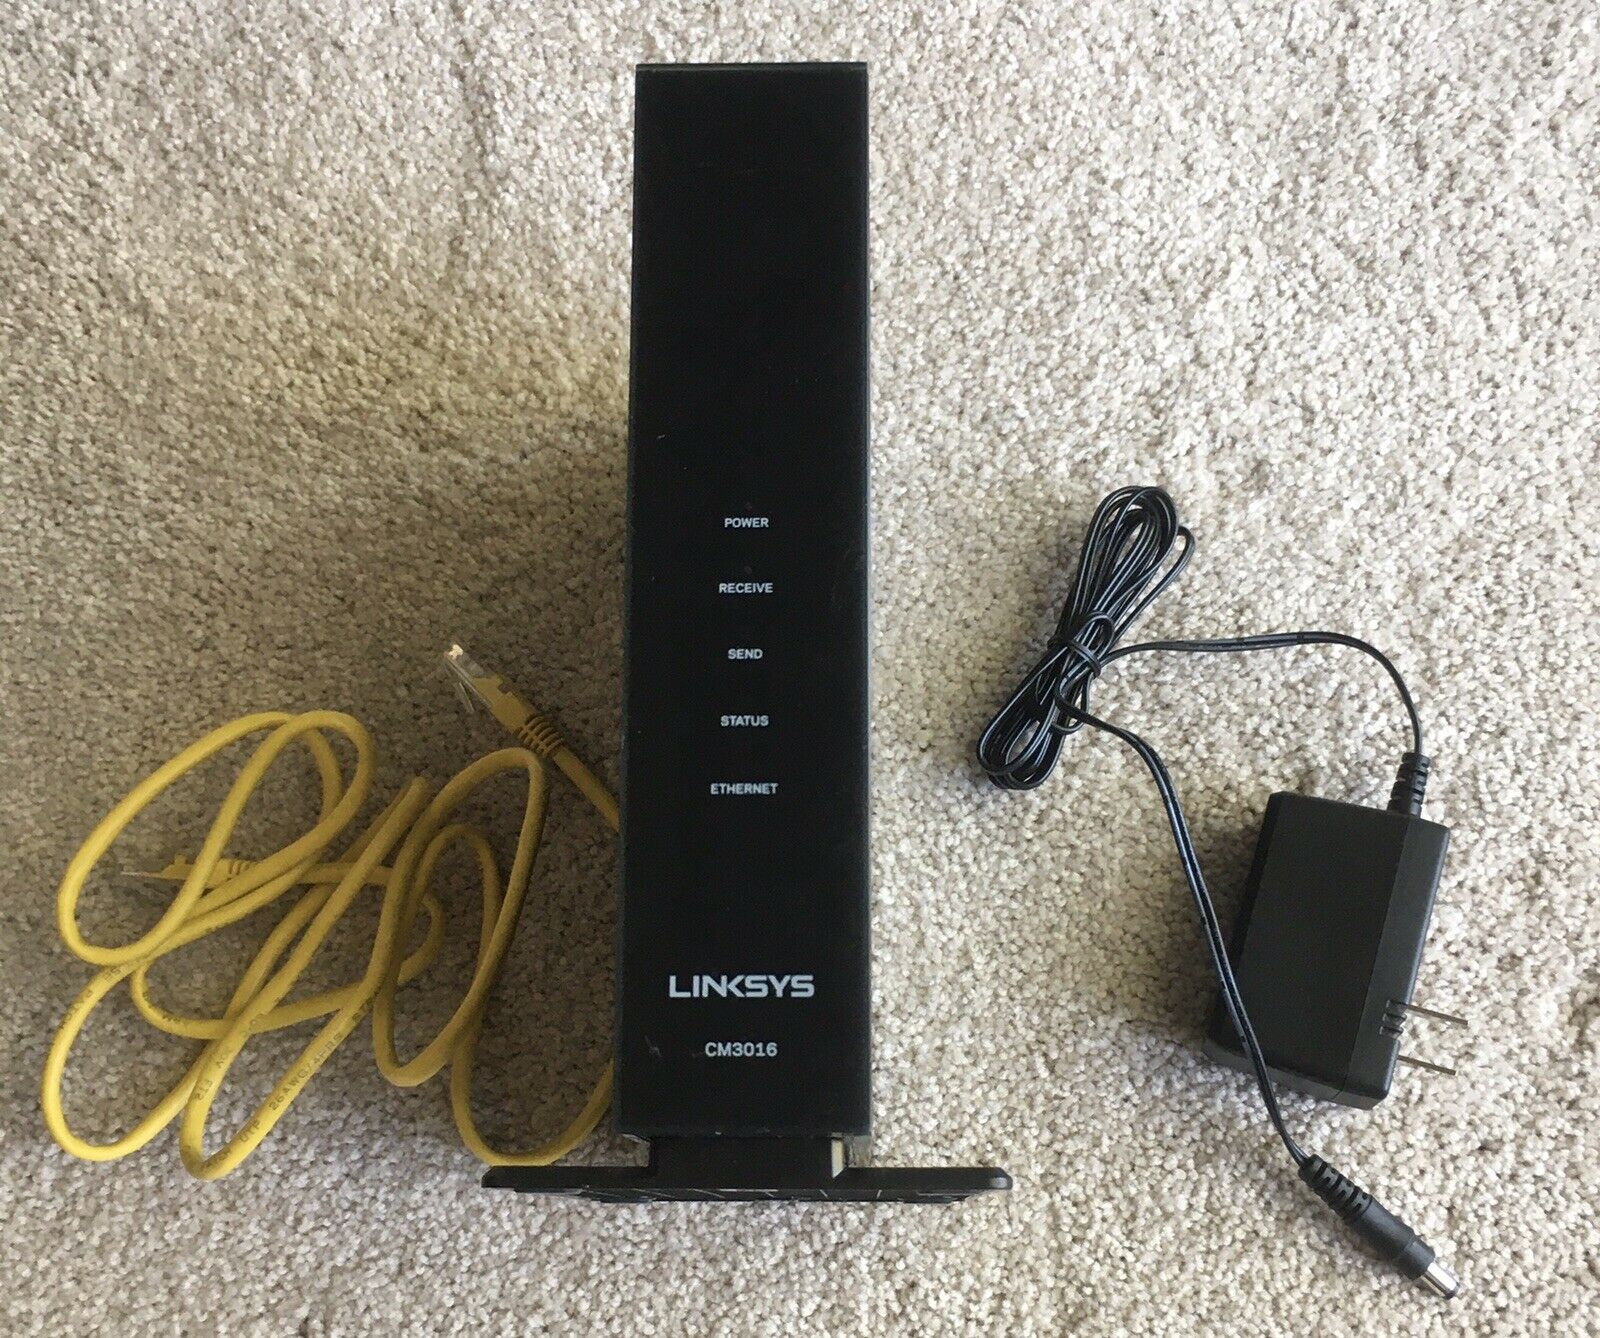 Exc Cond Linksys Cm3016 Docsis 3.0 16x4 Cable Modem & Ac Adapter Ethernet Cable